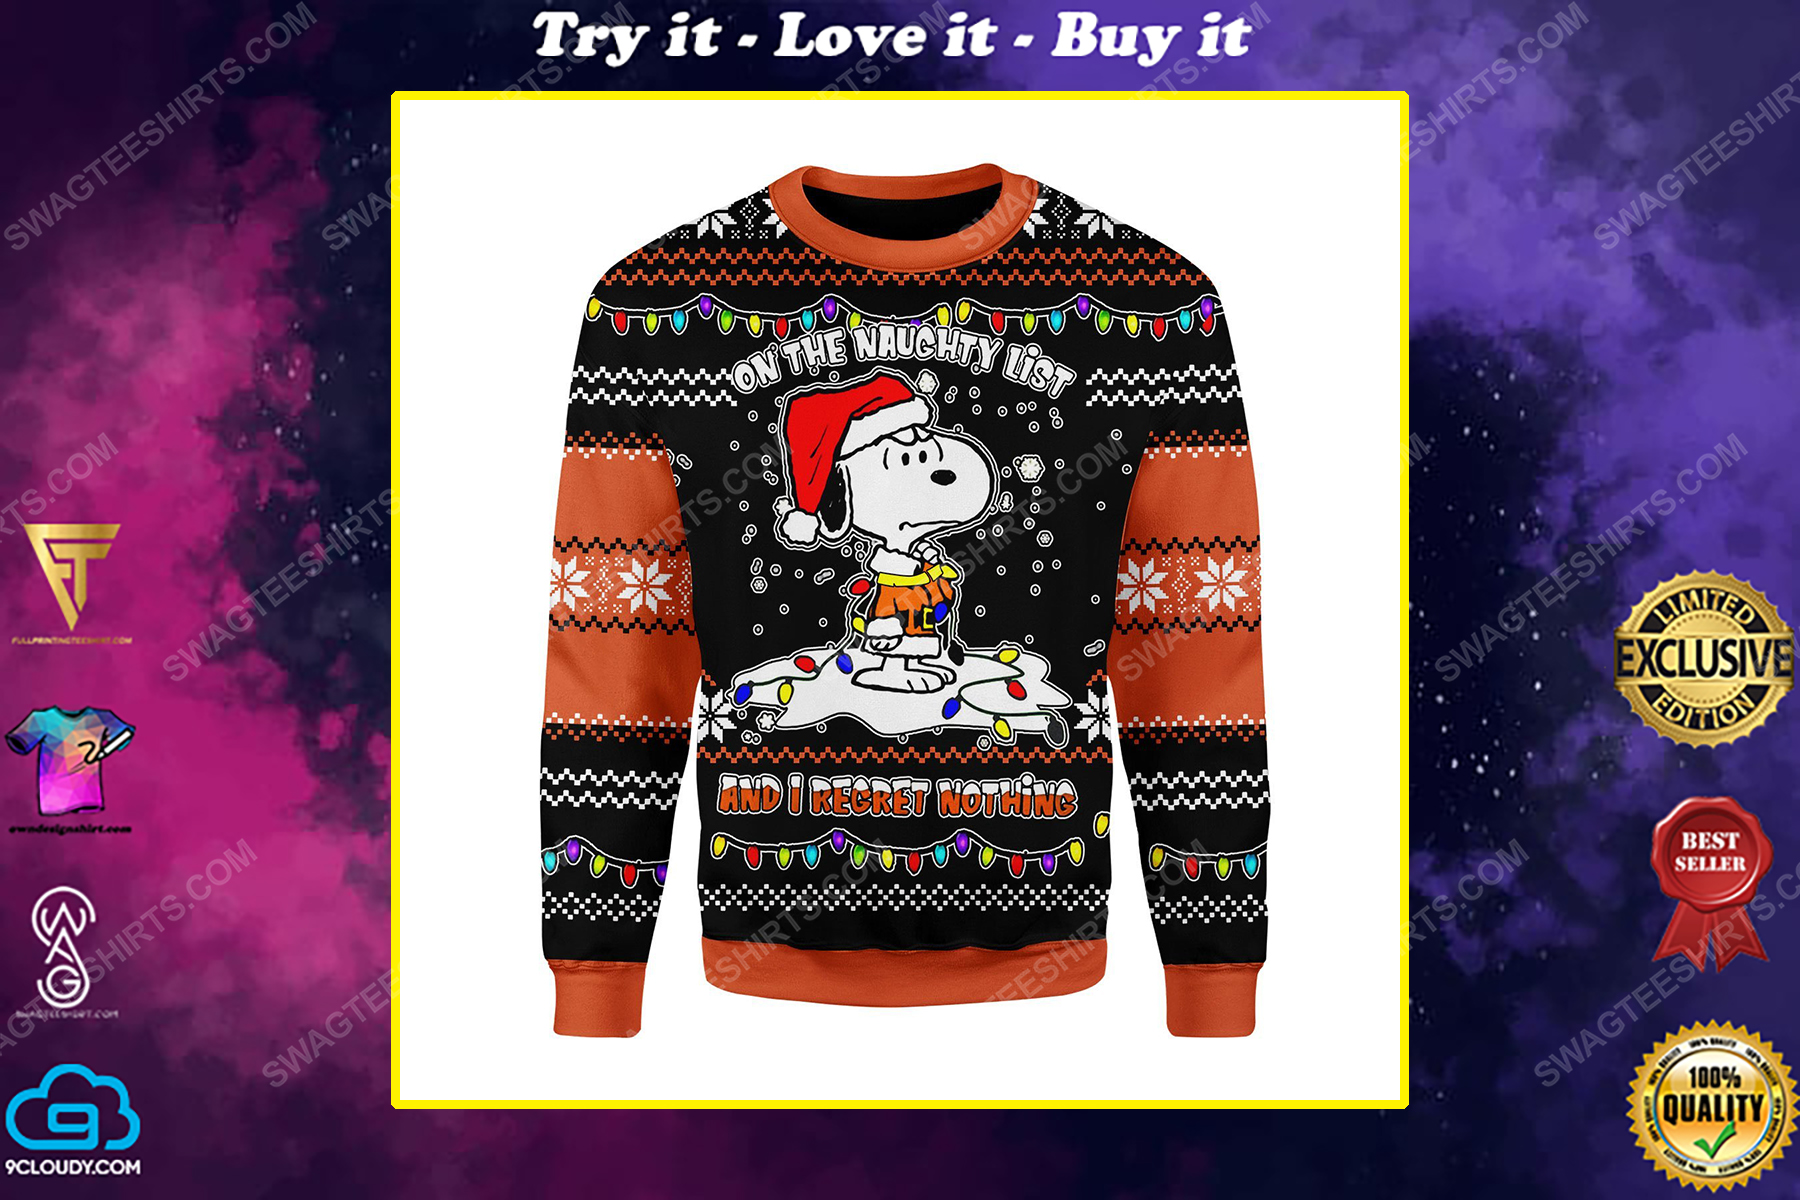 Snoopy on the naughty list and i regret nothing ugly christmas sweater